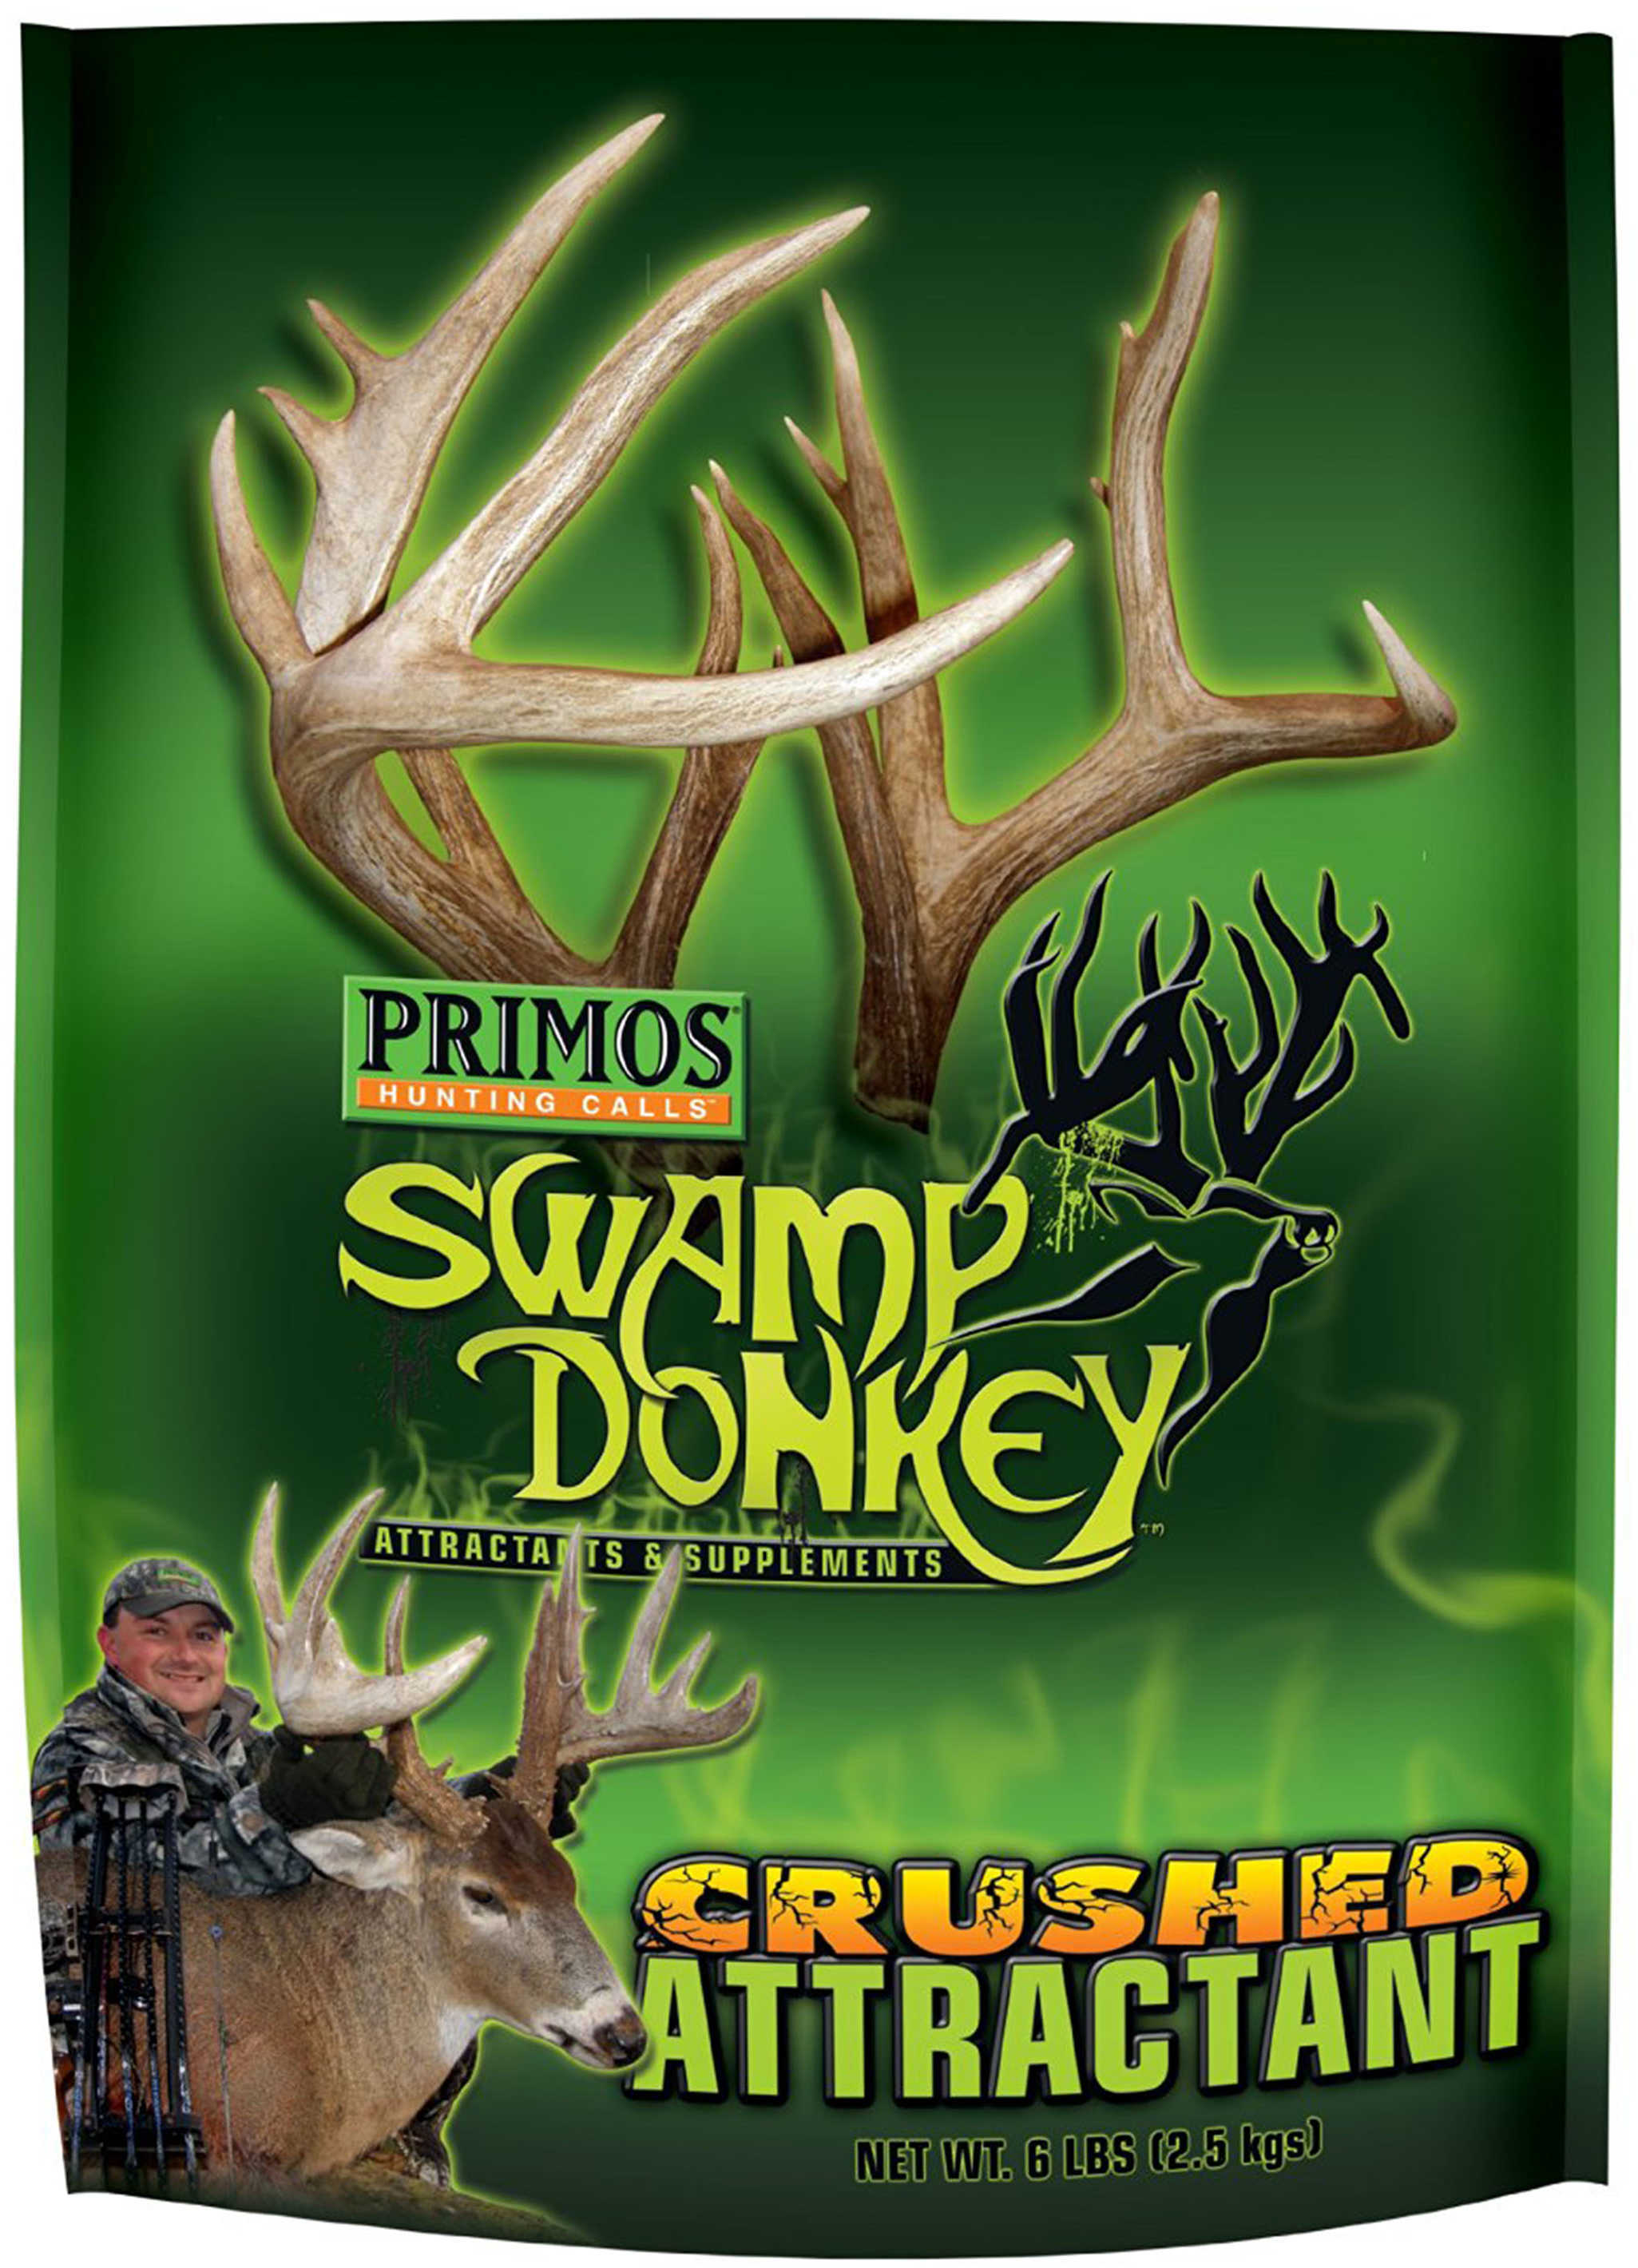 Primos Swamp Donkey Crushed Attractant 6# 58521